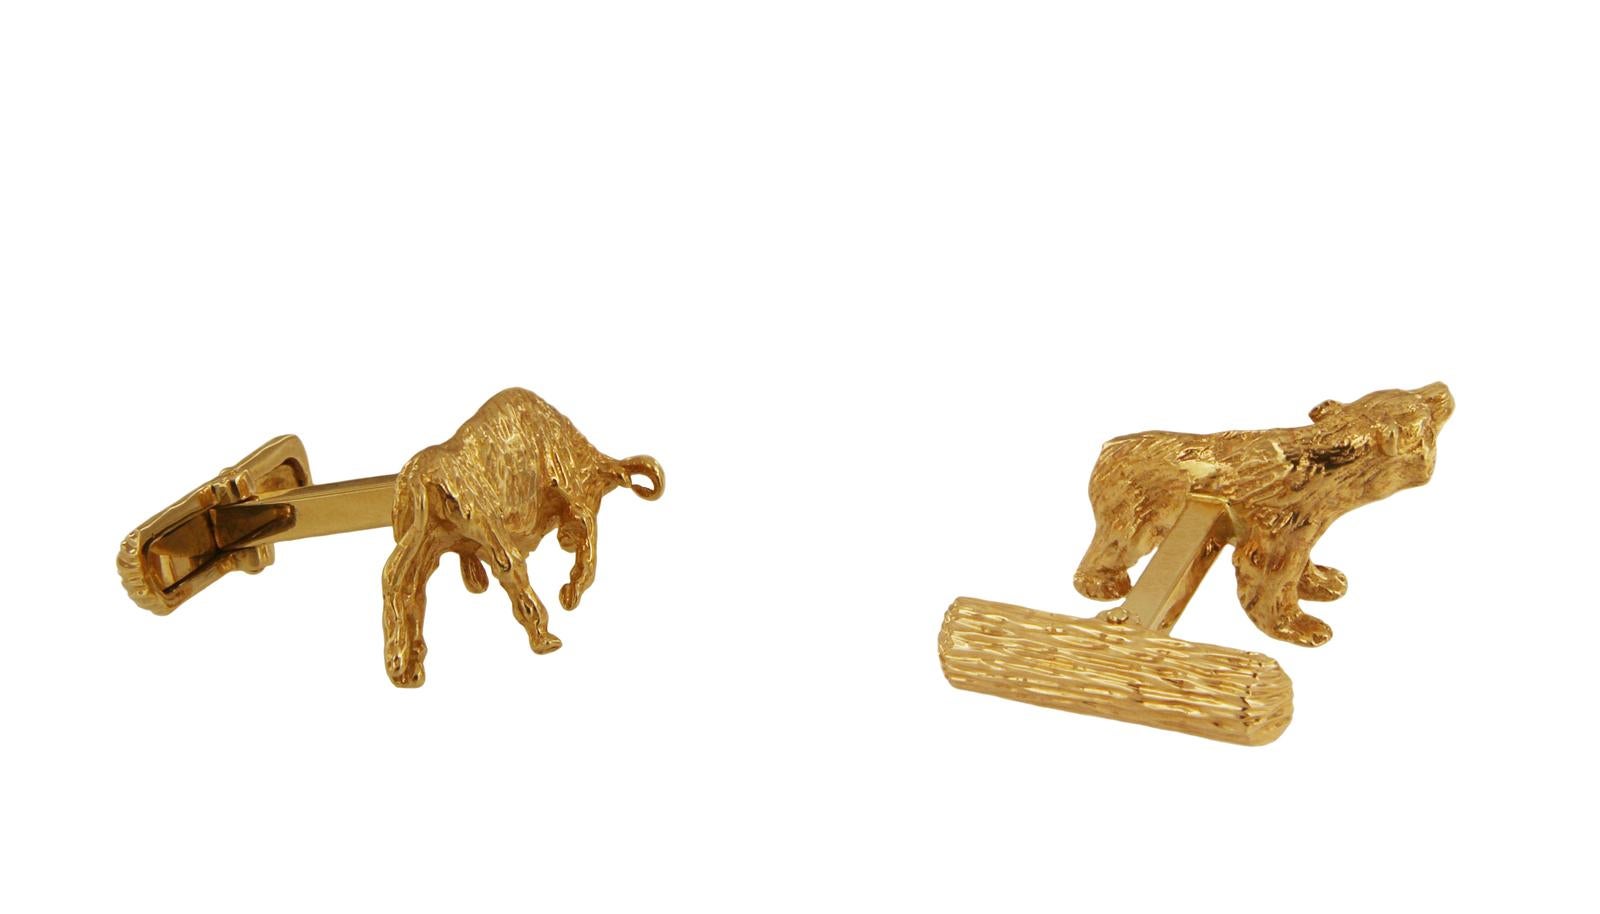 TIFFANY & CO. 14K YELLOW GOLD BEAR AND BULL CUFFLINKS. 

Mint condition
1 Bull and 1 Bear cufflink with Toggle Backs
Crafted in 14k Yellow Gold, Richly Textured and Intricately Detailed
Cufflinks measure approximately 22 x 13 mm
Cufflinks are